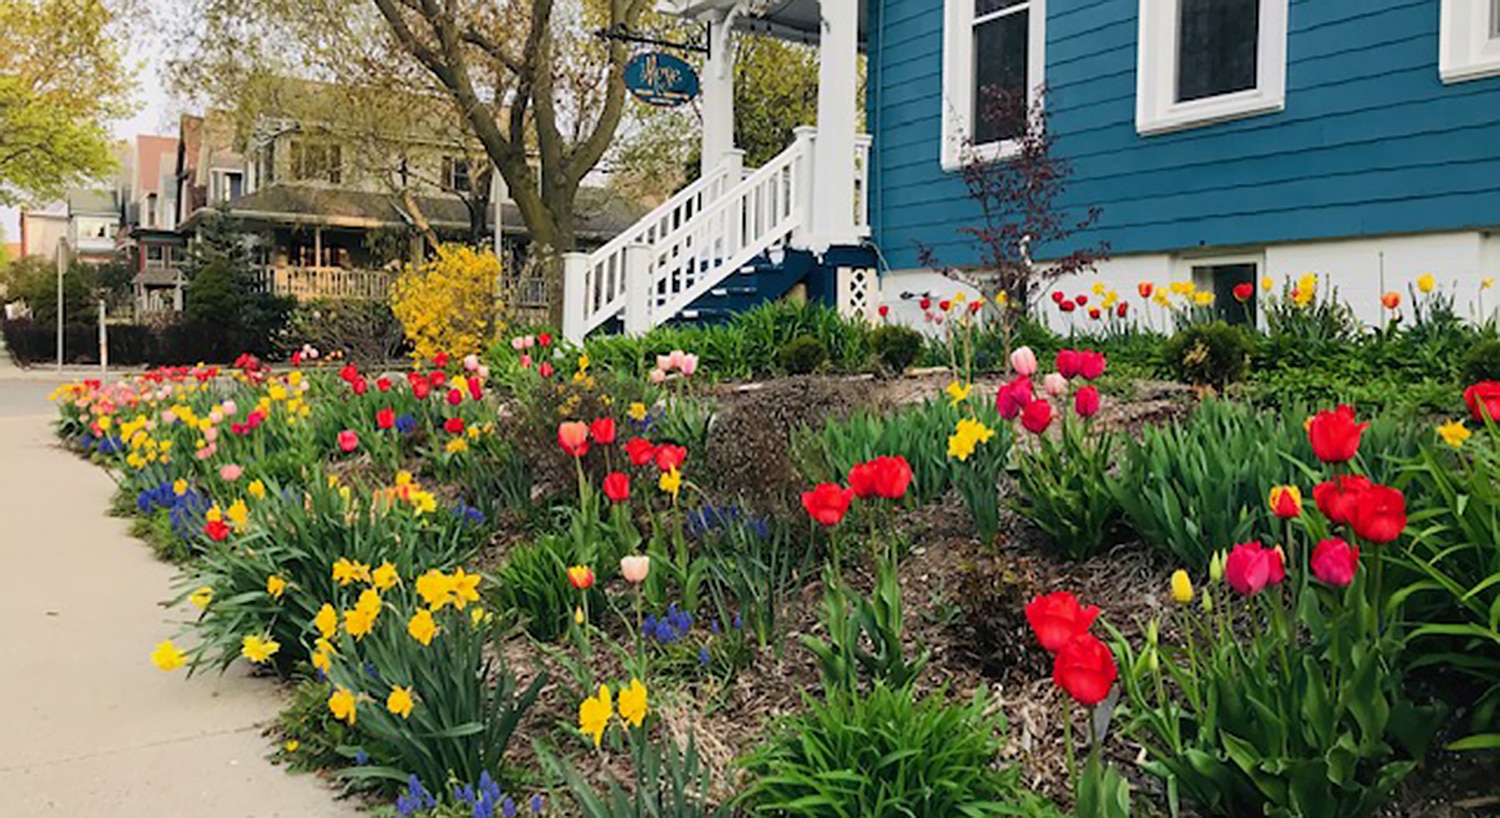 Garden with tulips and daffodils in front of the blue and white Victorian house